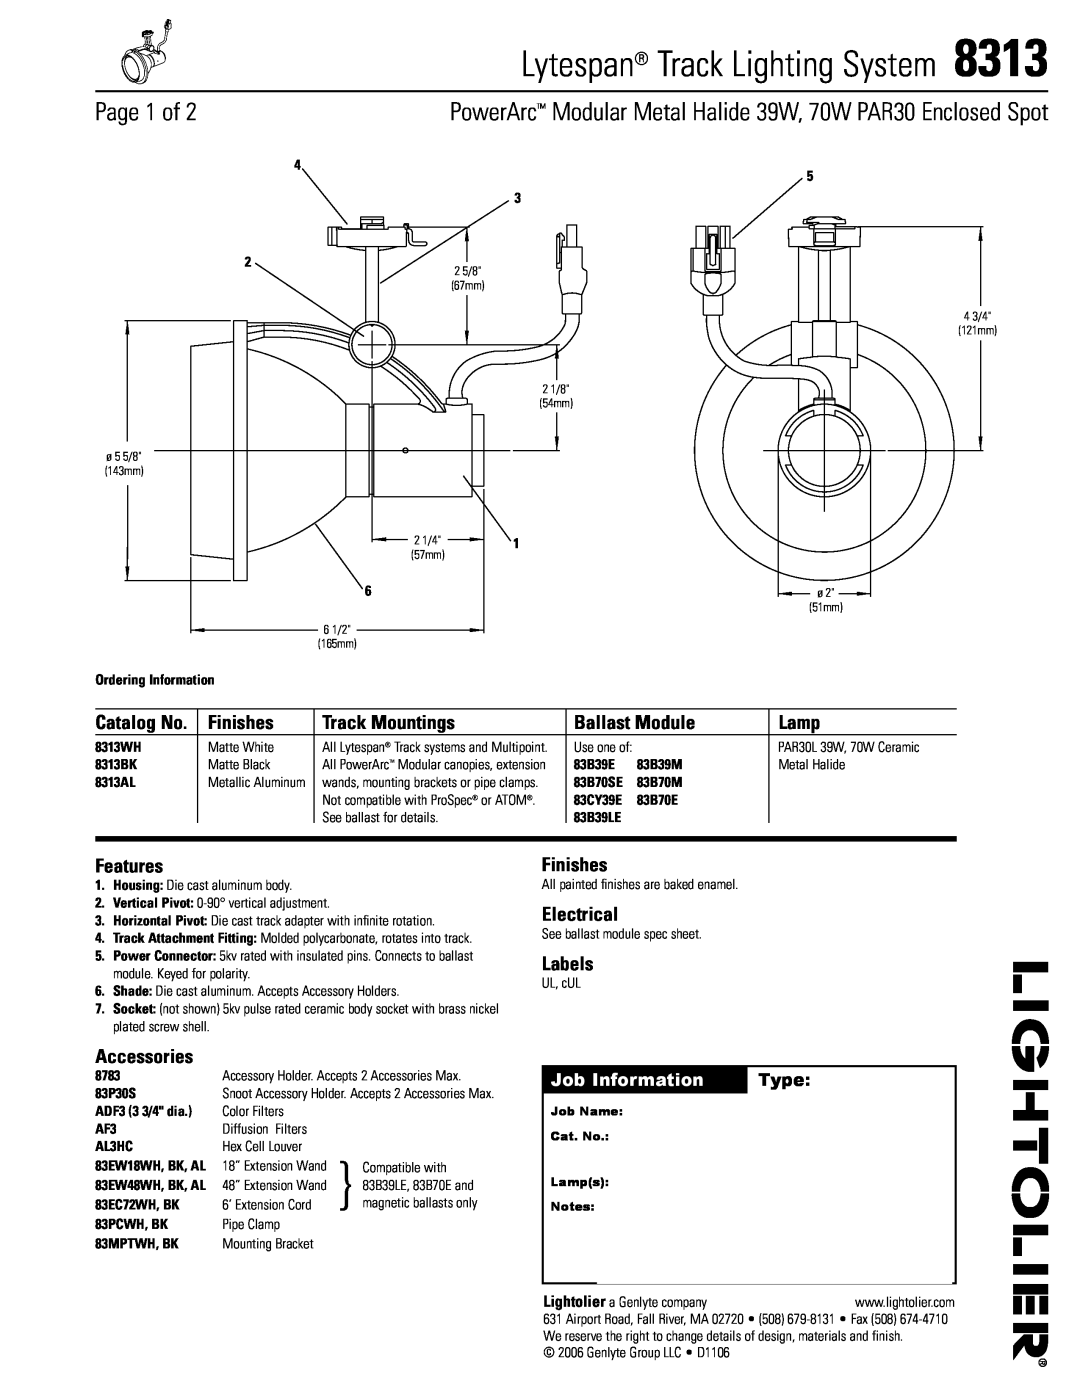 Lightolier 8313 manual Finishes, Track Mountings, Ballast Module, Lamp, Features, Accessories, Electrical, Labels, Type 